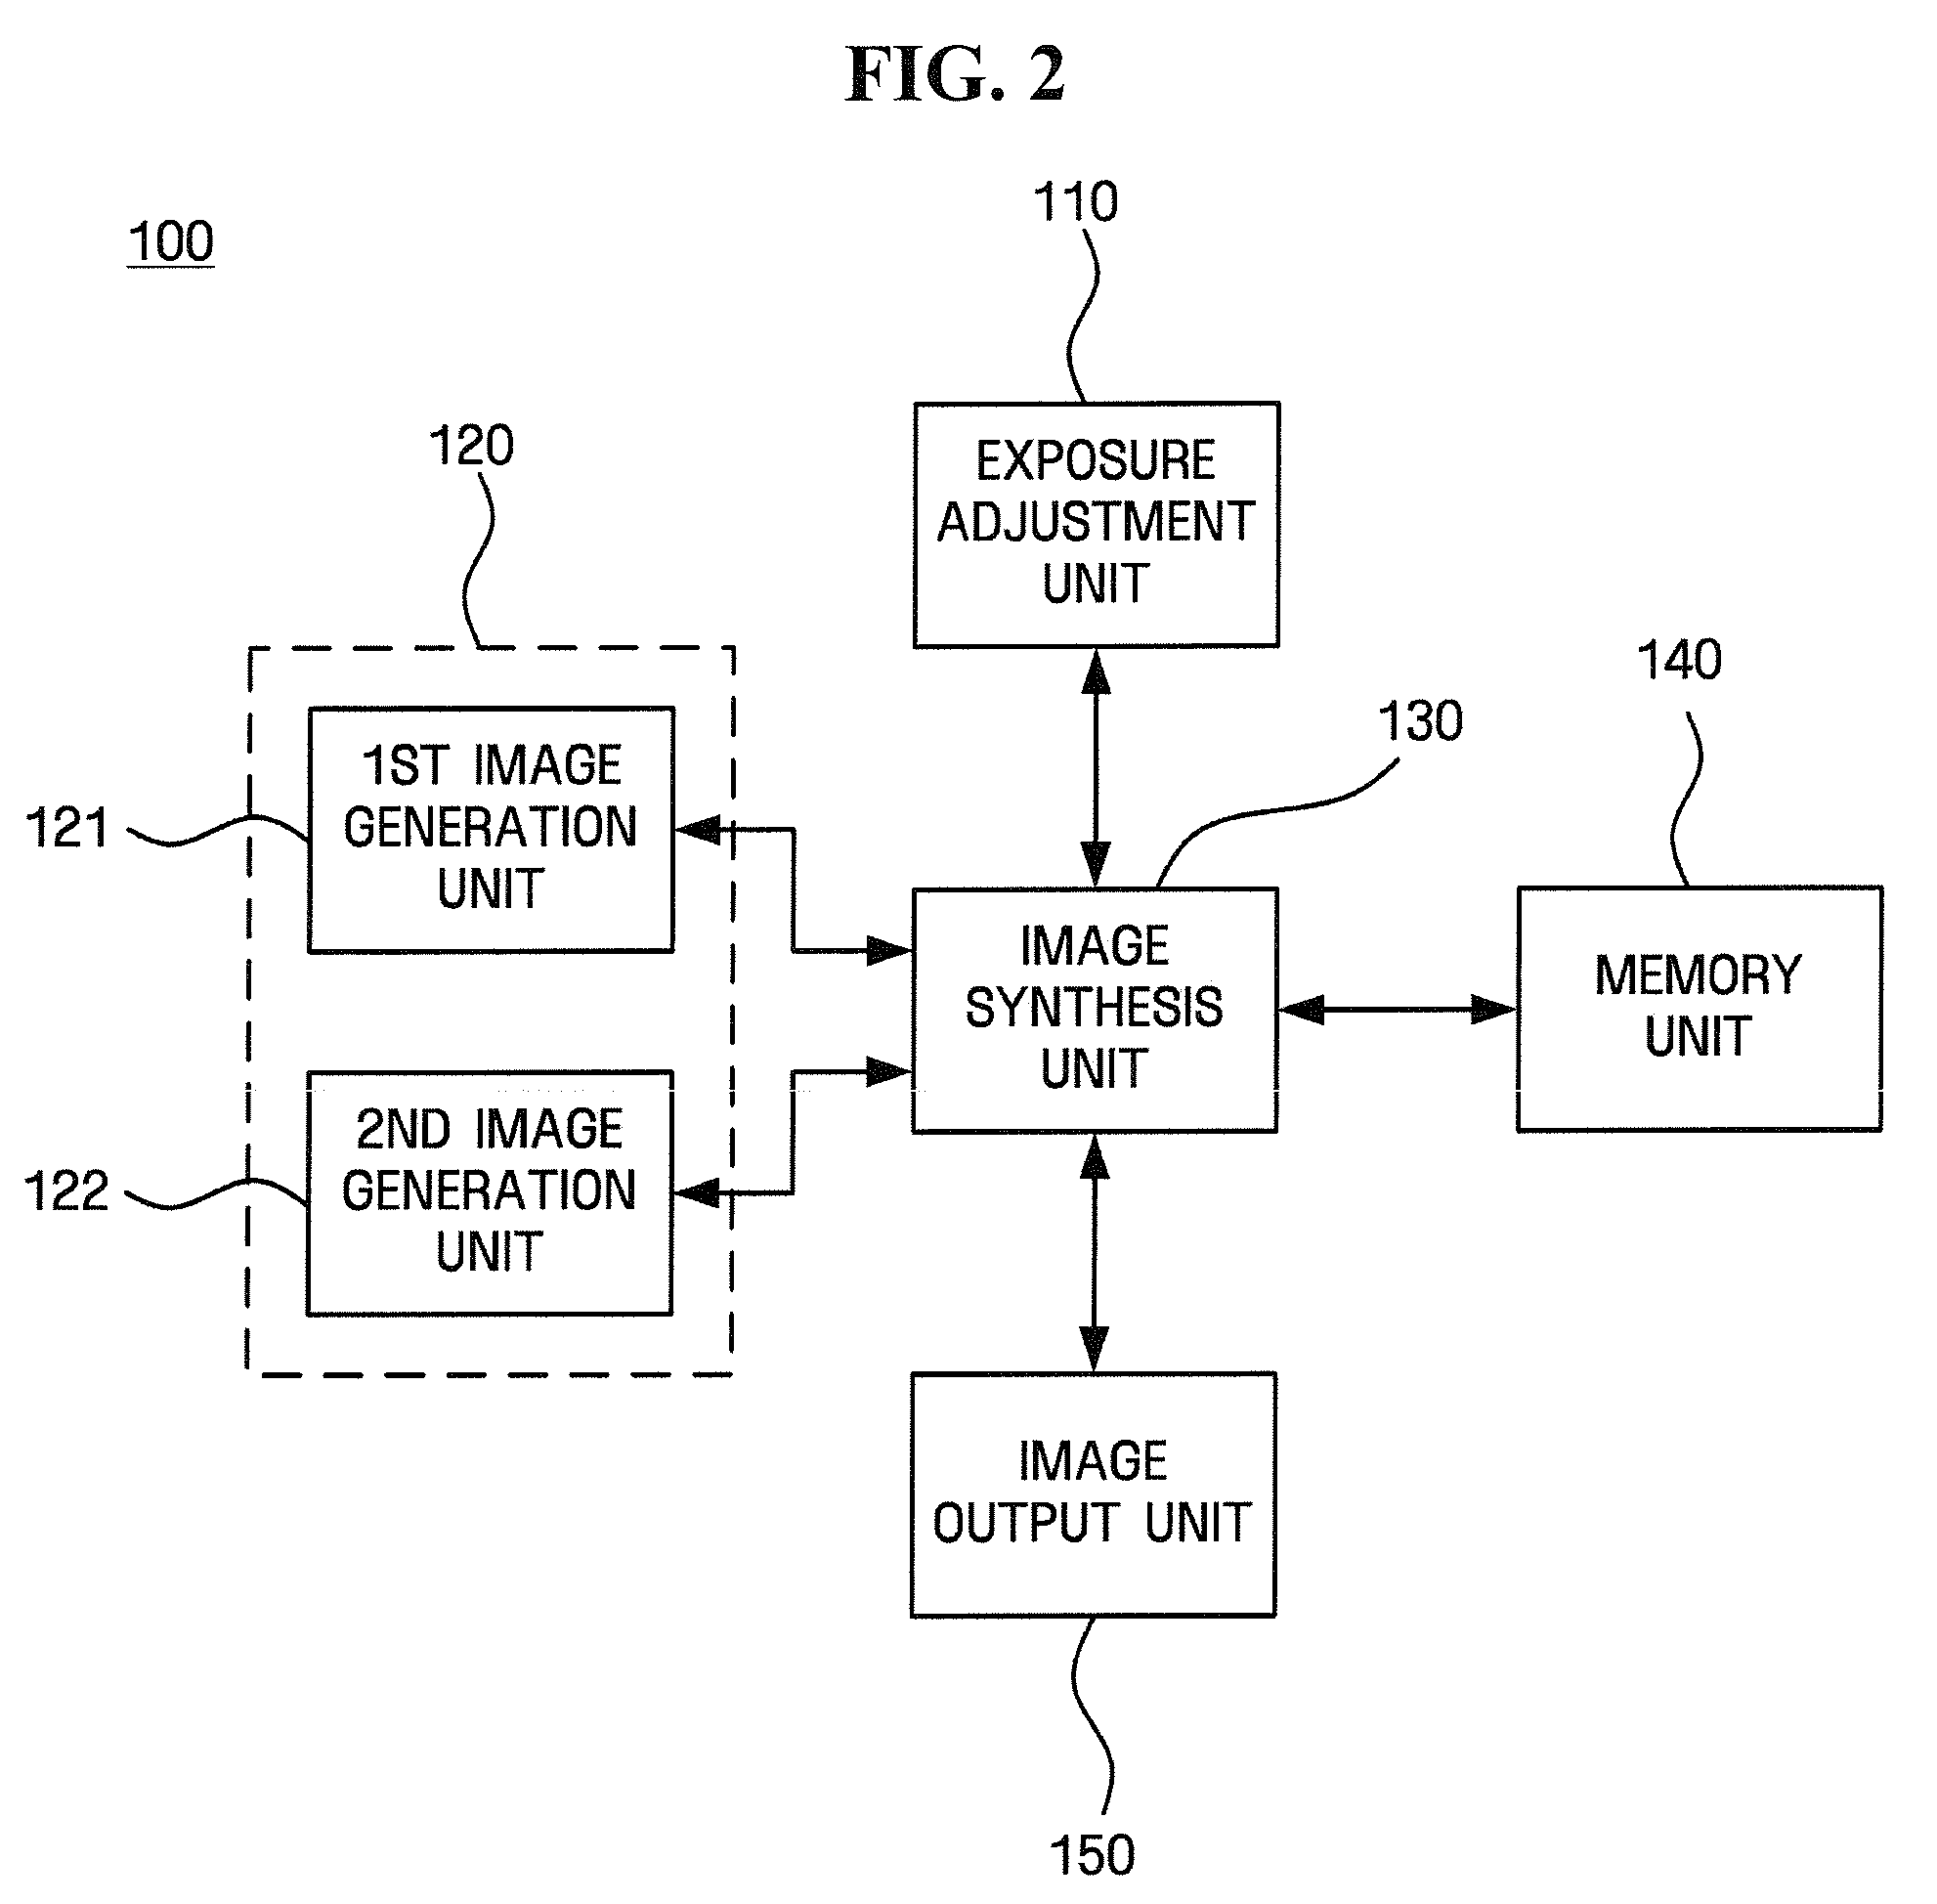 Apparatus and method to synthesize or combine generated images